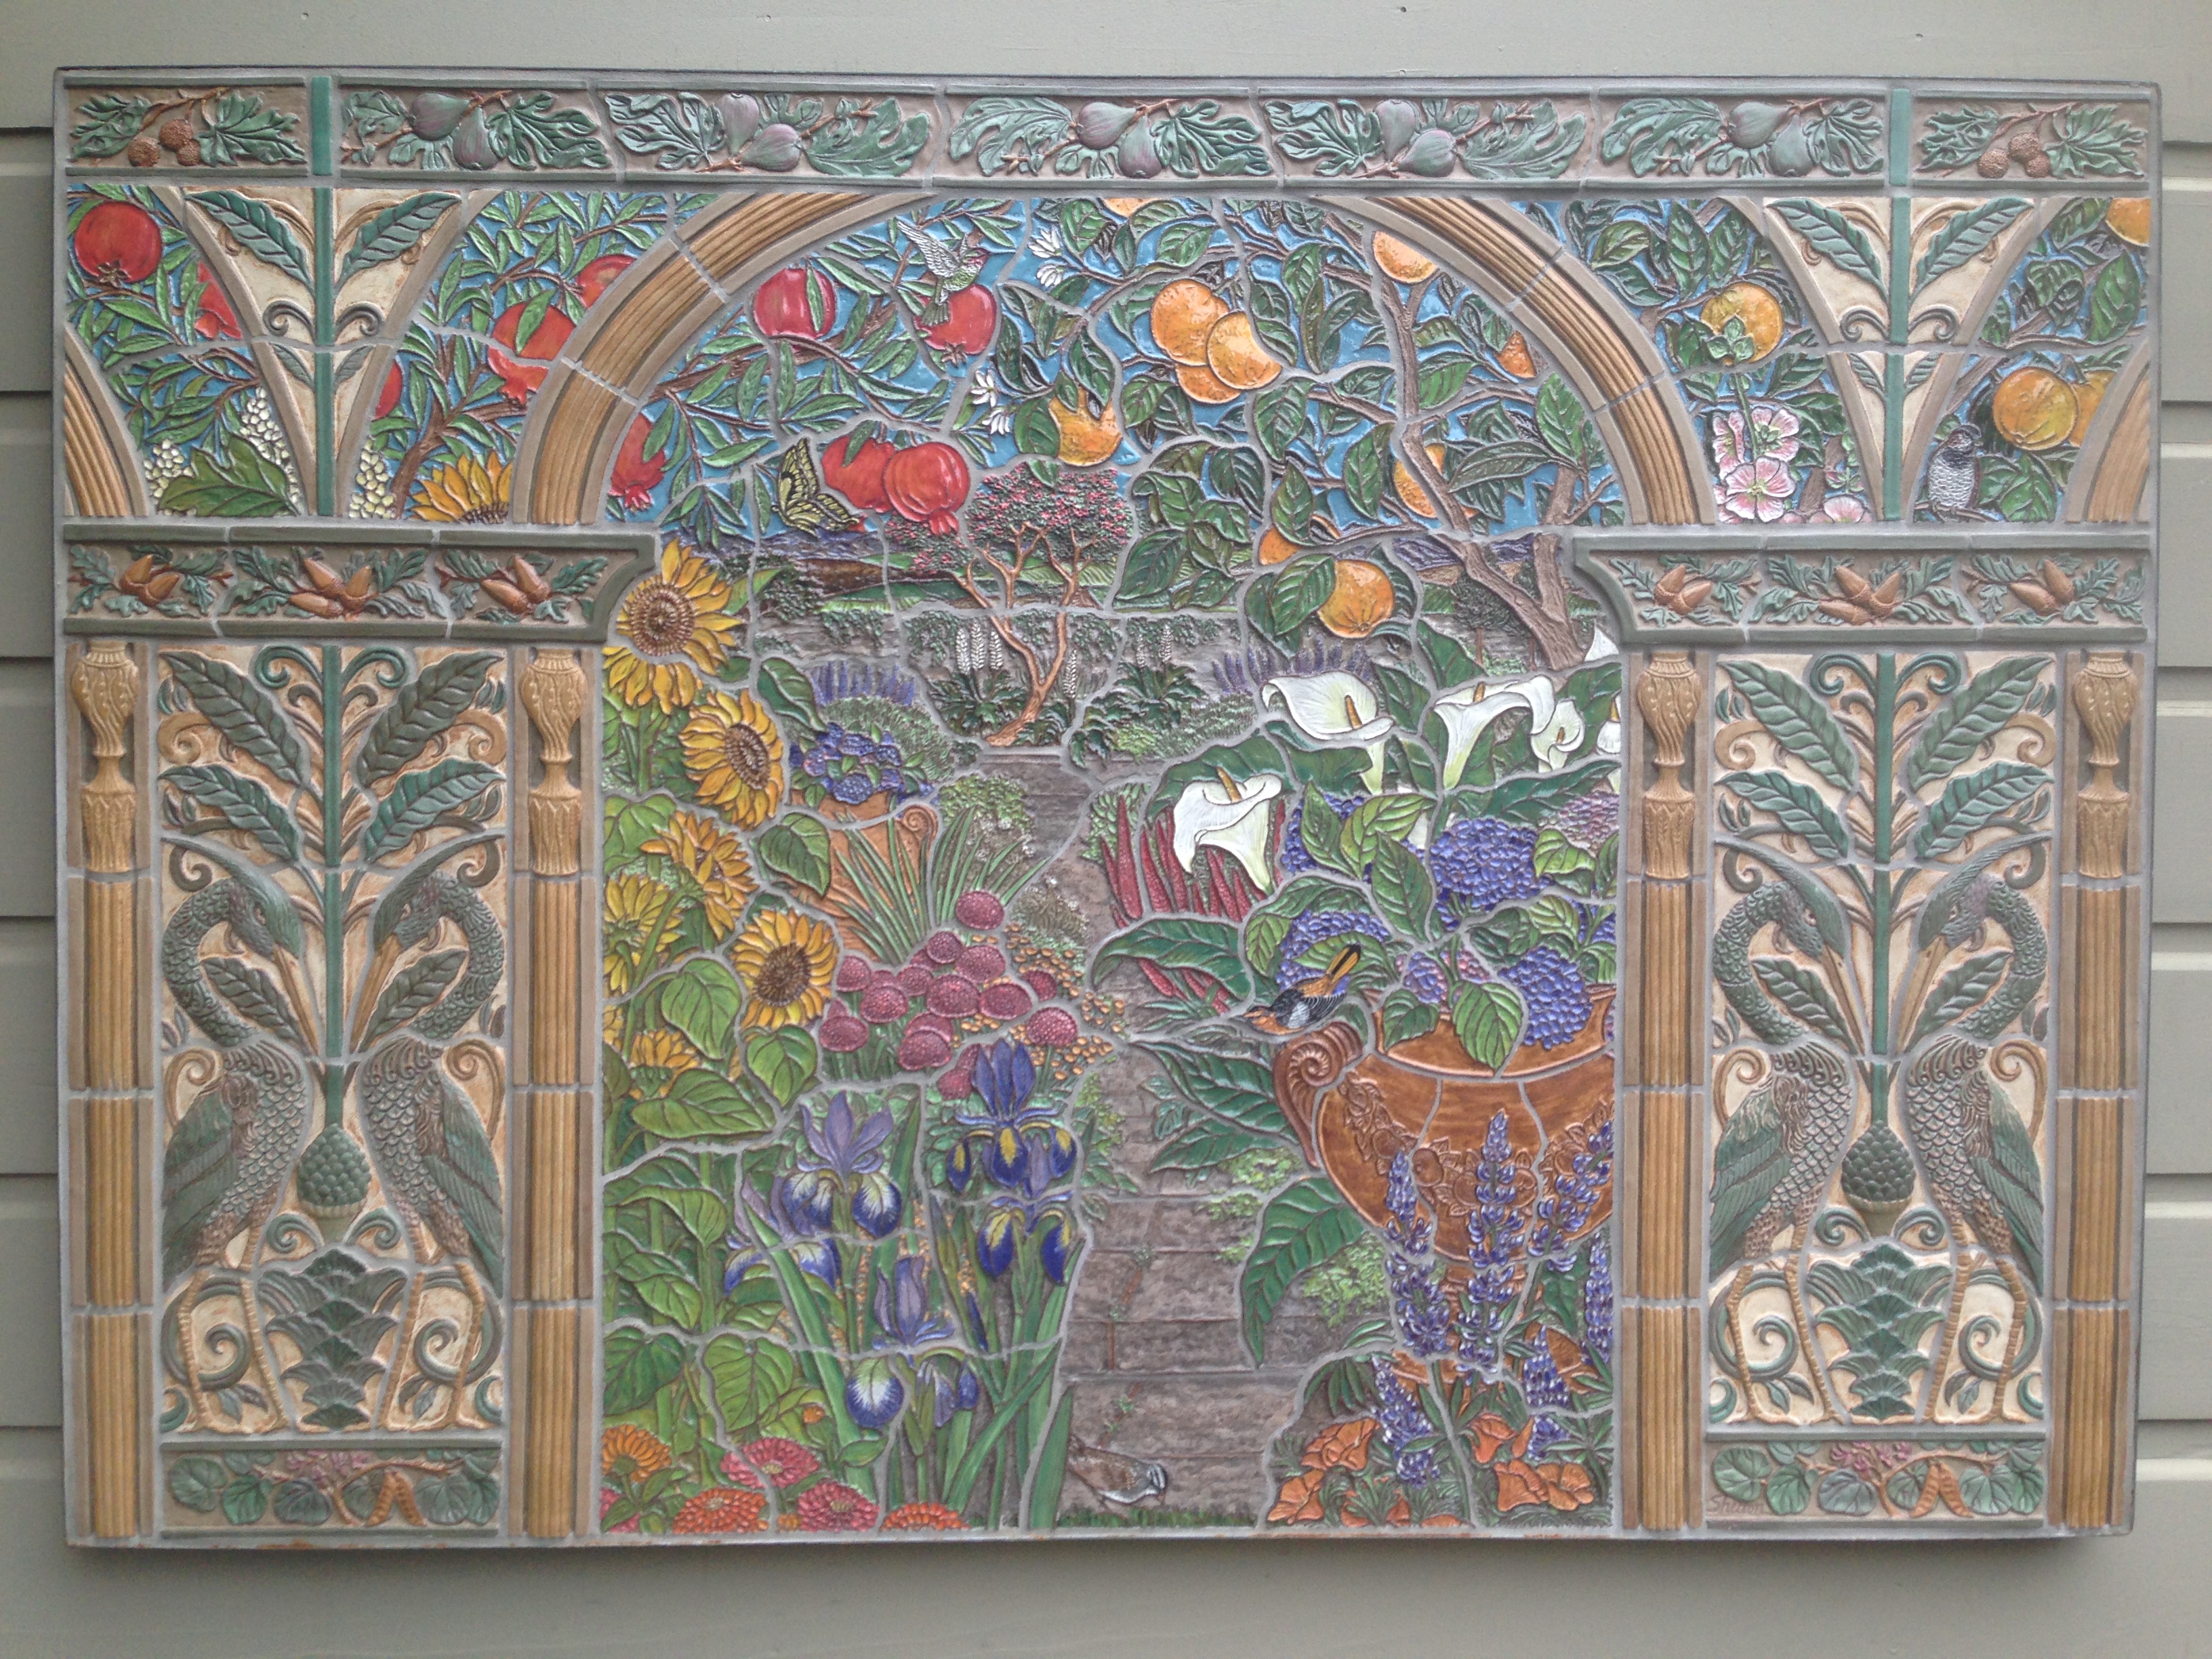 Carved Ceramic Garden Mural with Victorian Architectural Elements